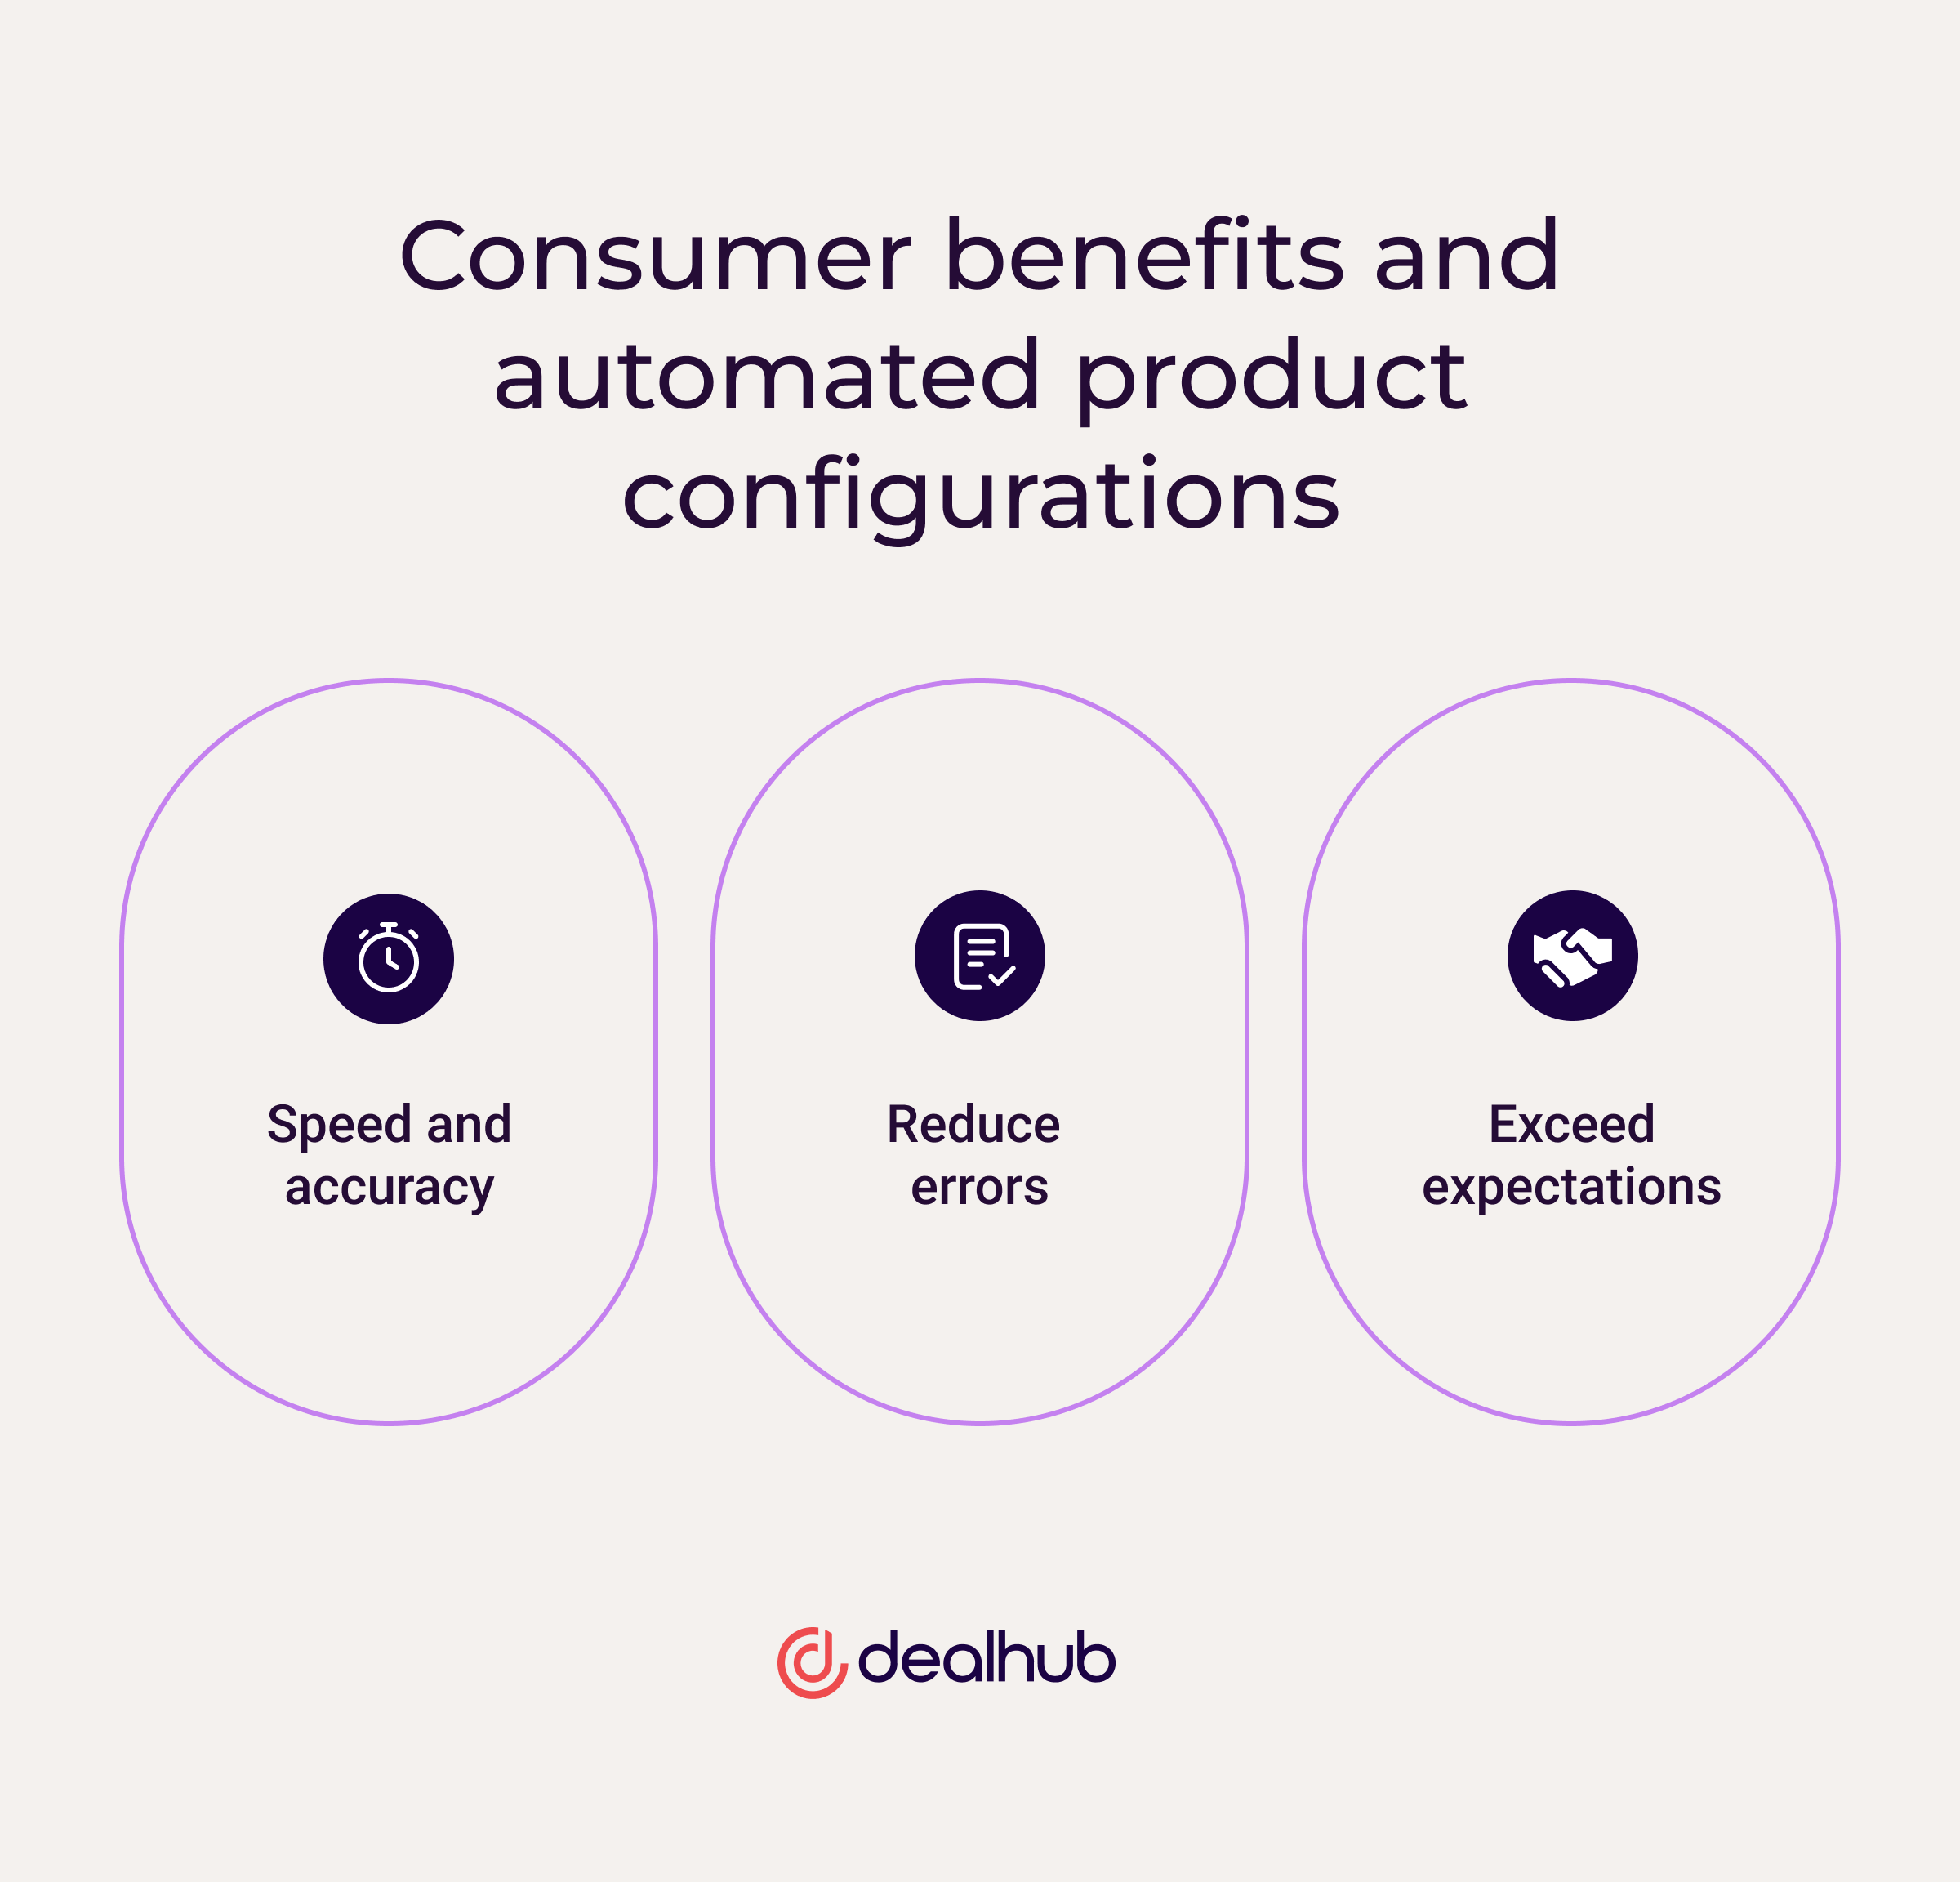 Consumer benefits and automated product configurations